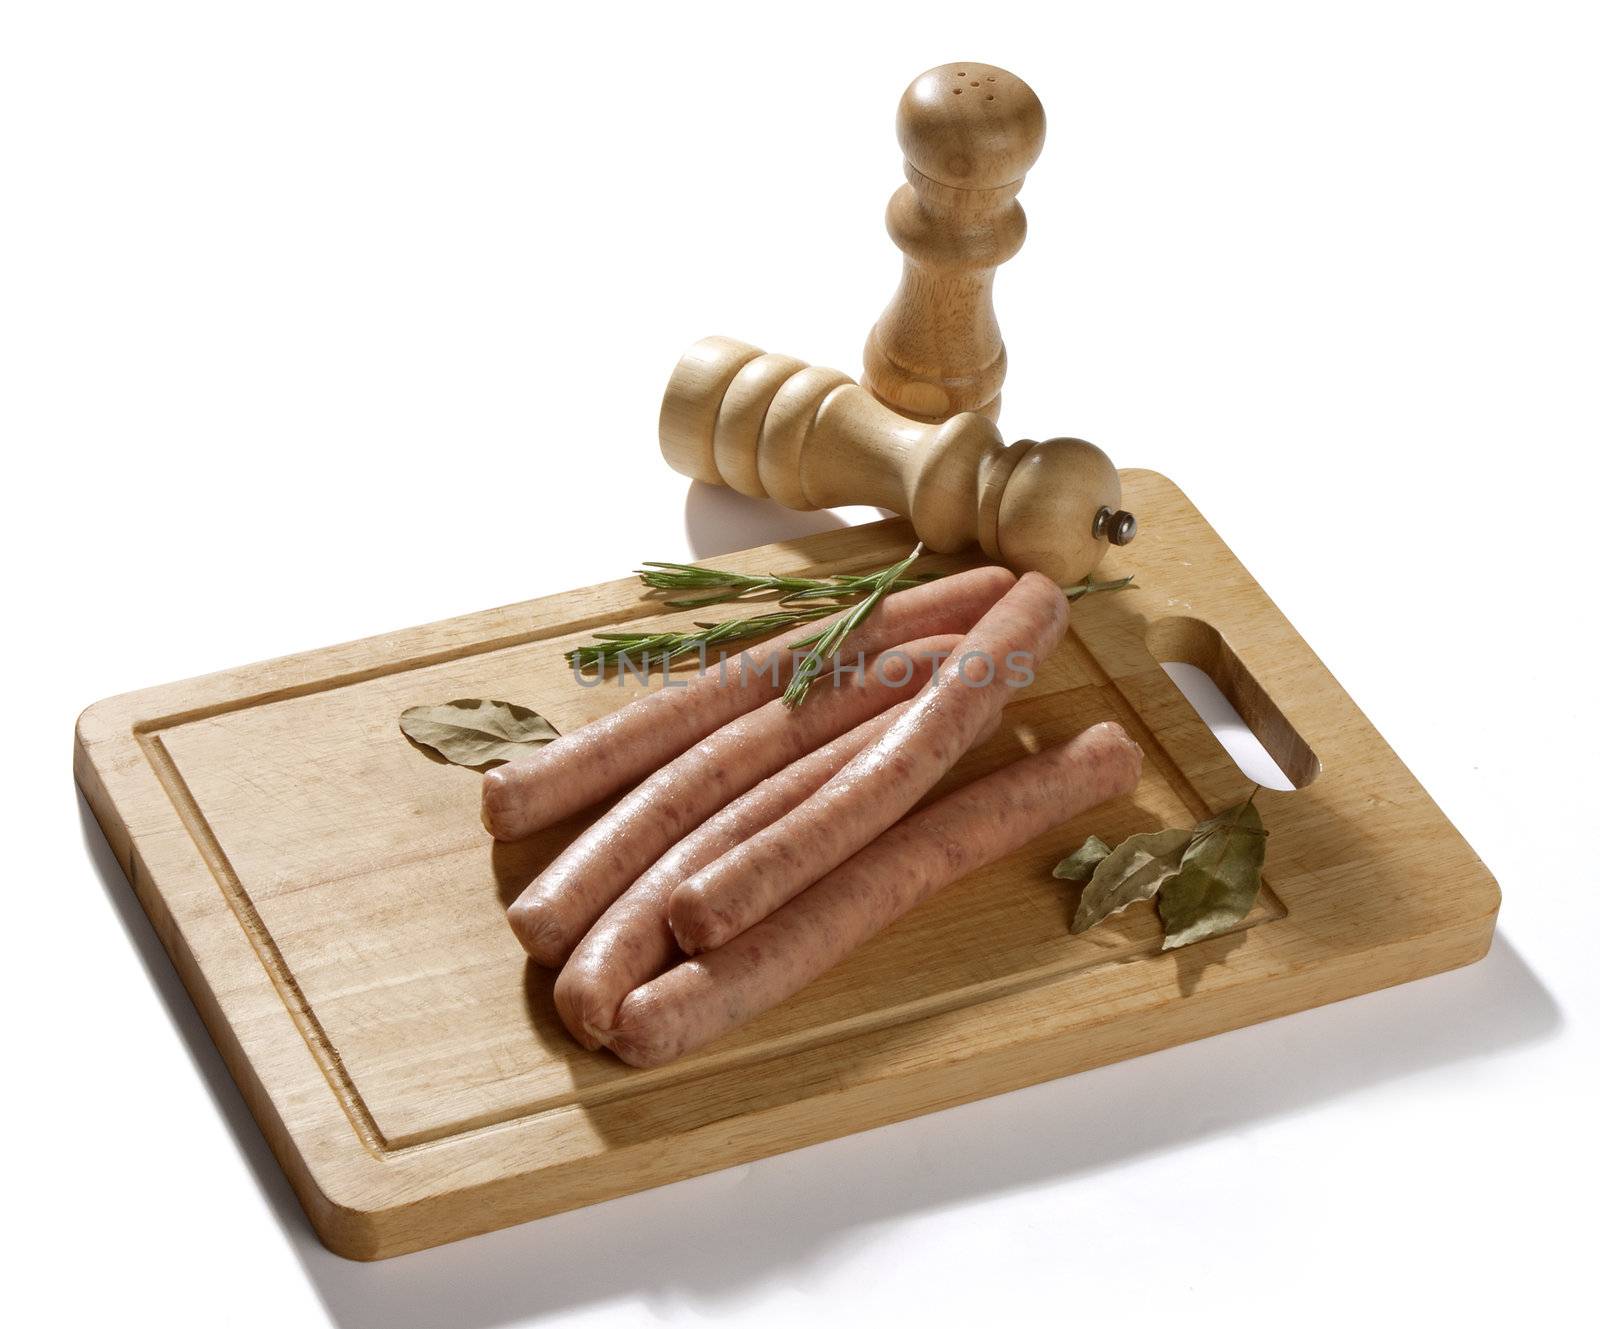 Some raw bavarian sausages on the wooden board with rosemary and bay leaf